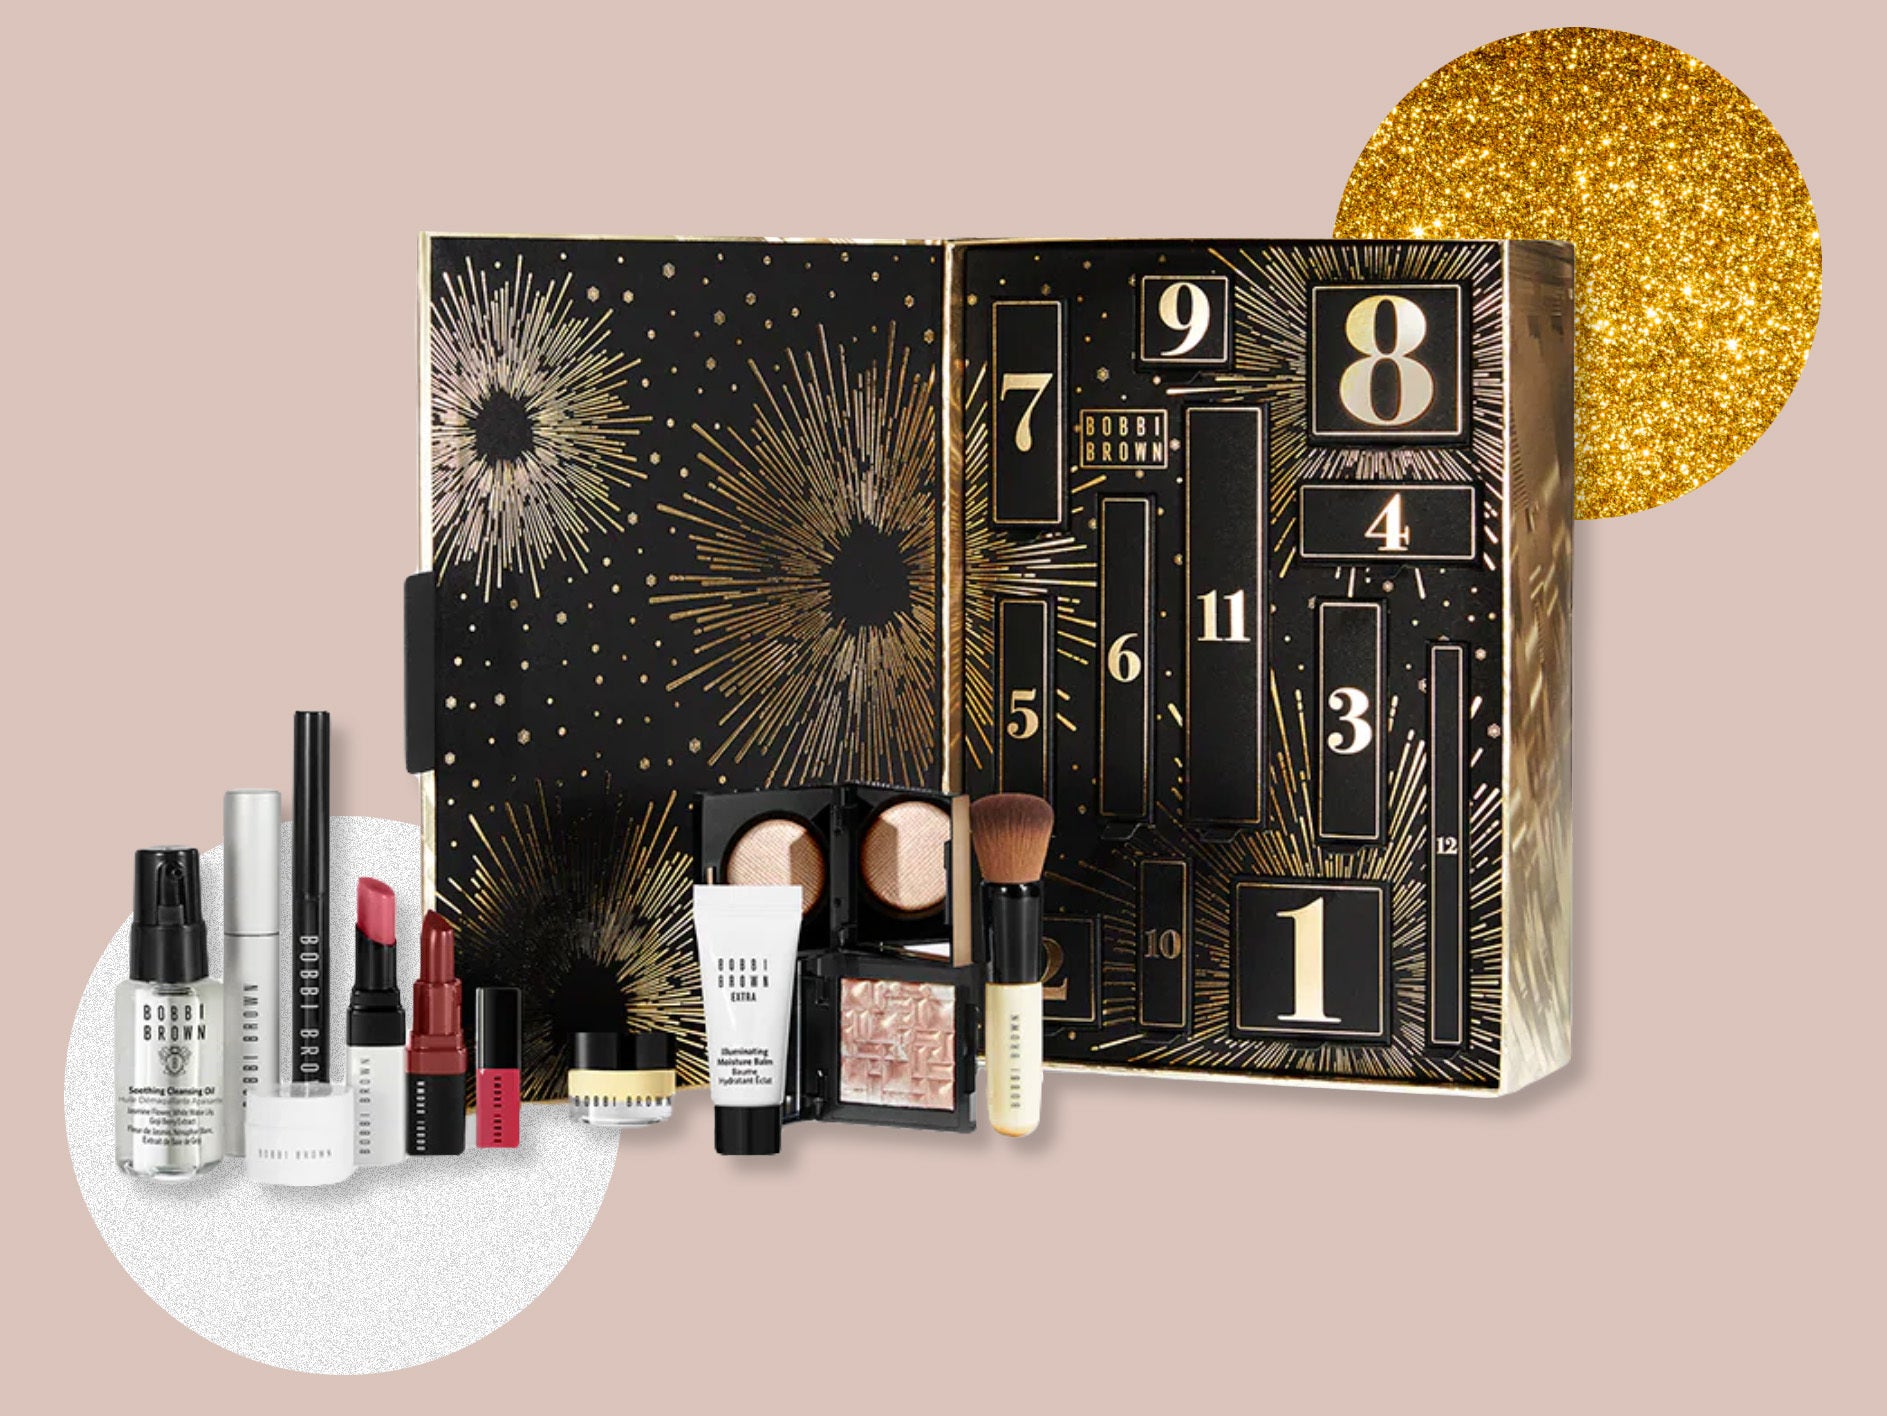 The box features a striking black and gold fireworks design